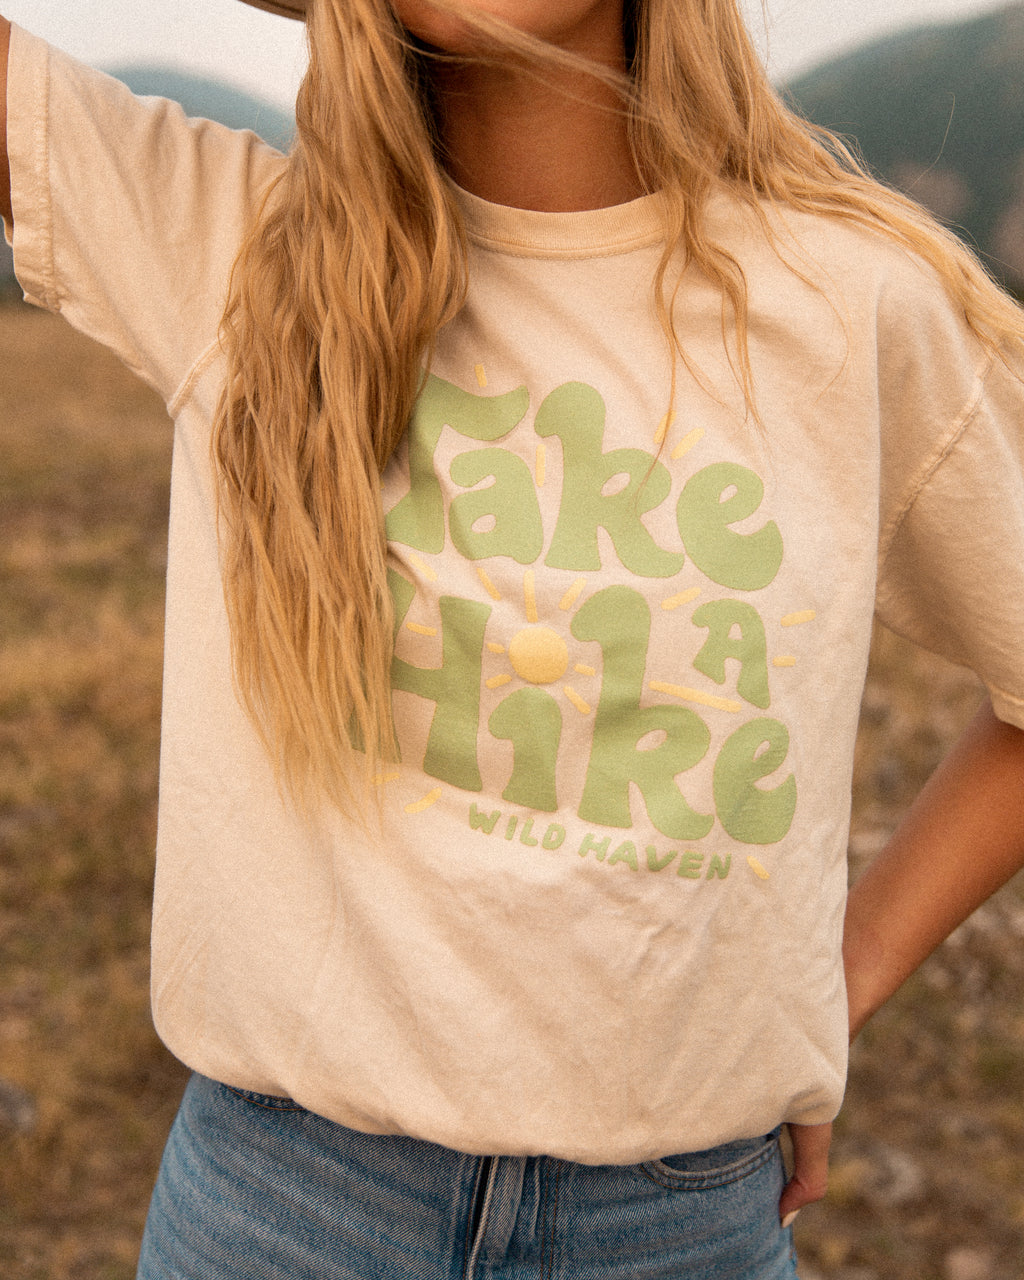 Take a Hike Short Sleeve T-Shirt in Ivory